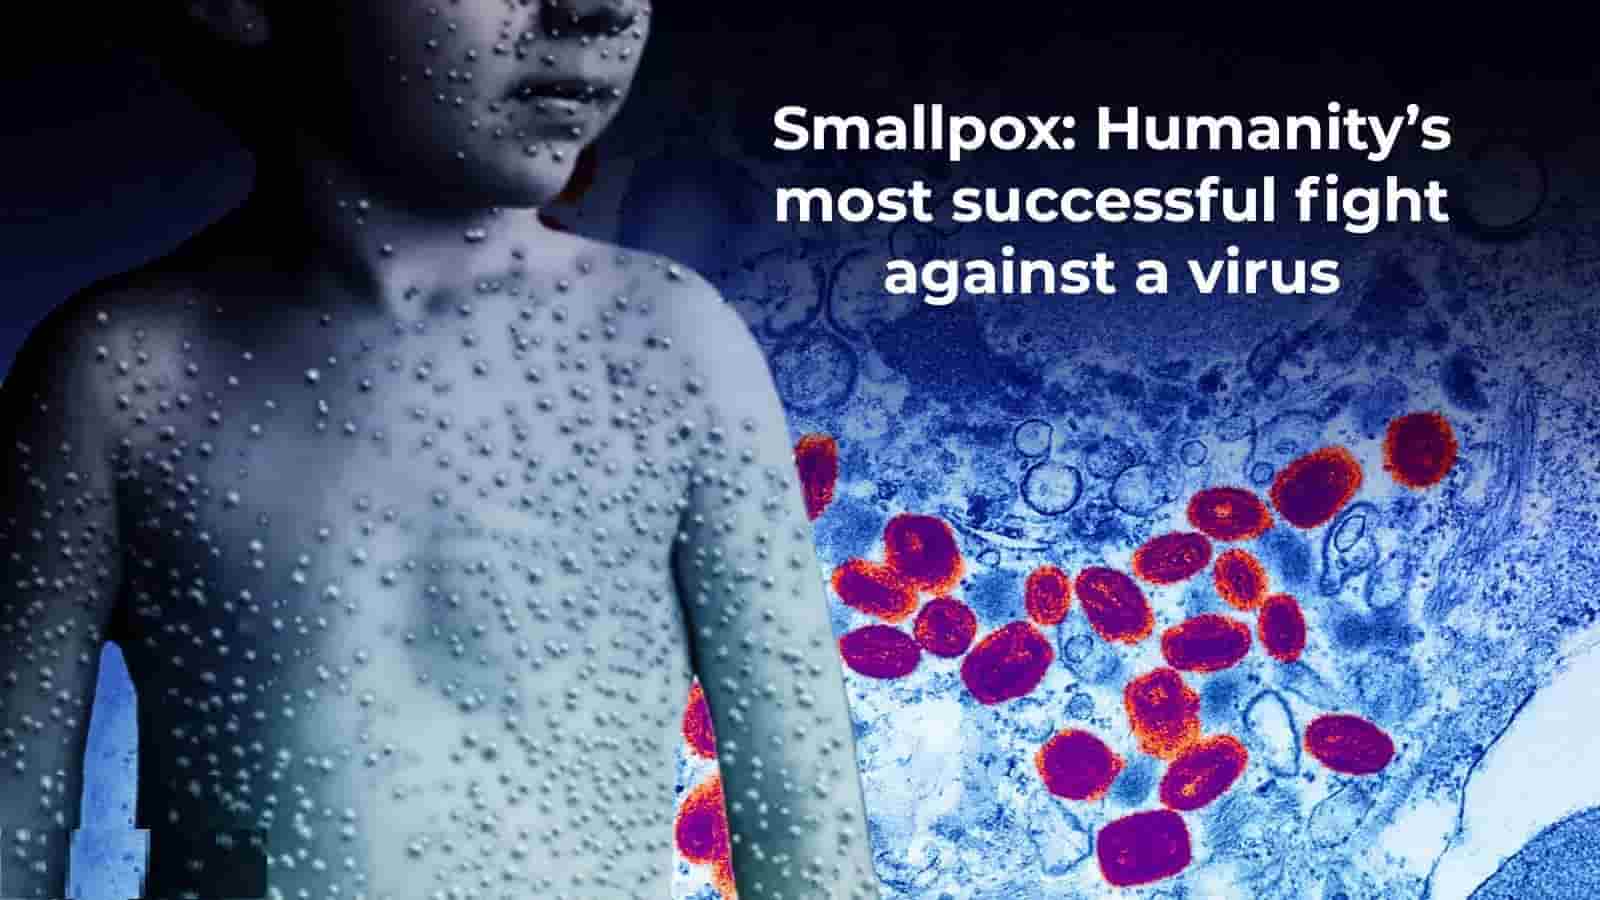 what is smallpox?